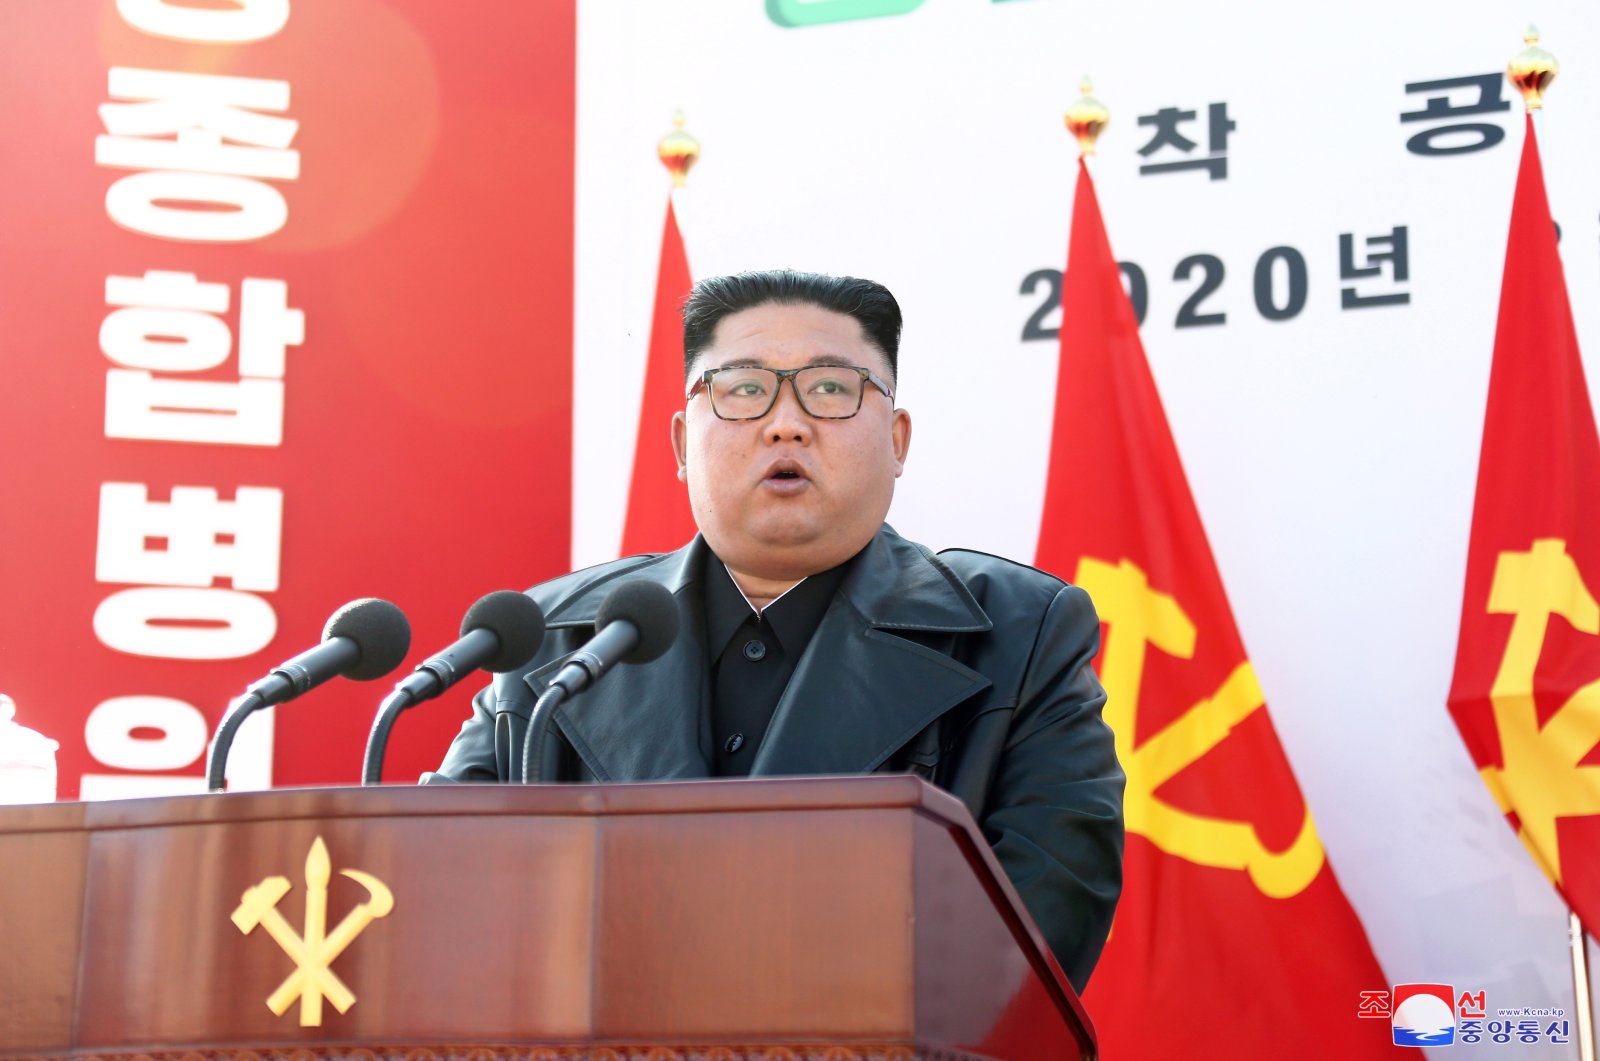 A photo released by the official North Korean Central News Agency (KCNA) shows shows North Korean leader Kim Jong-un delivering a speech on the occasion of the 75th founding anniversary, at the ground-breaking ceremony of for the construction of the Pyongynag Hospital, 17 March 2020 (issued 01 May 2020). (EPA Photo)